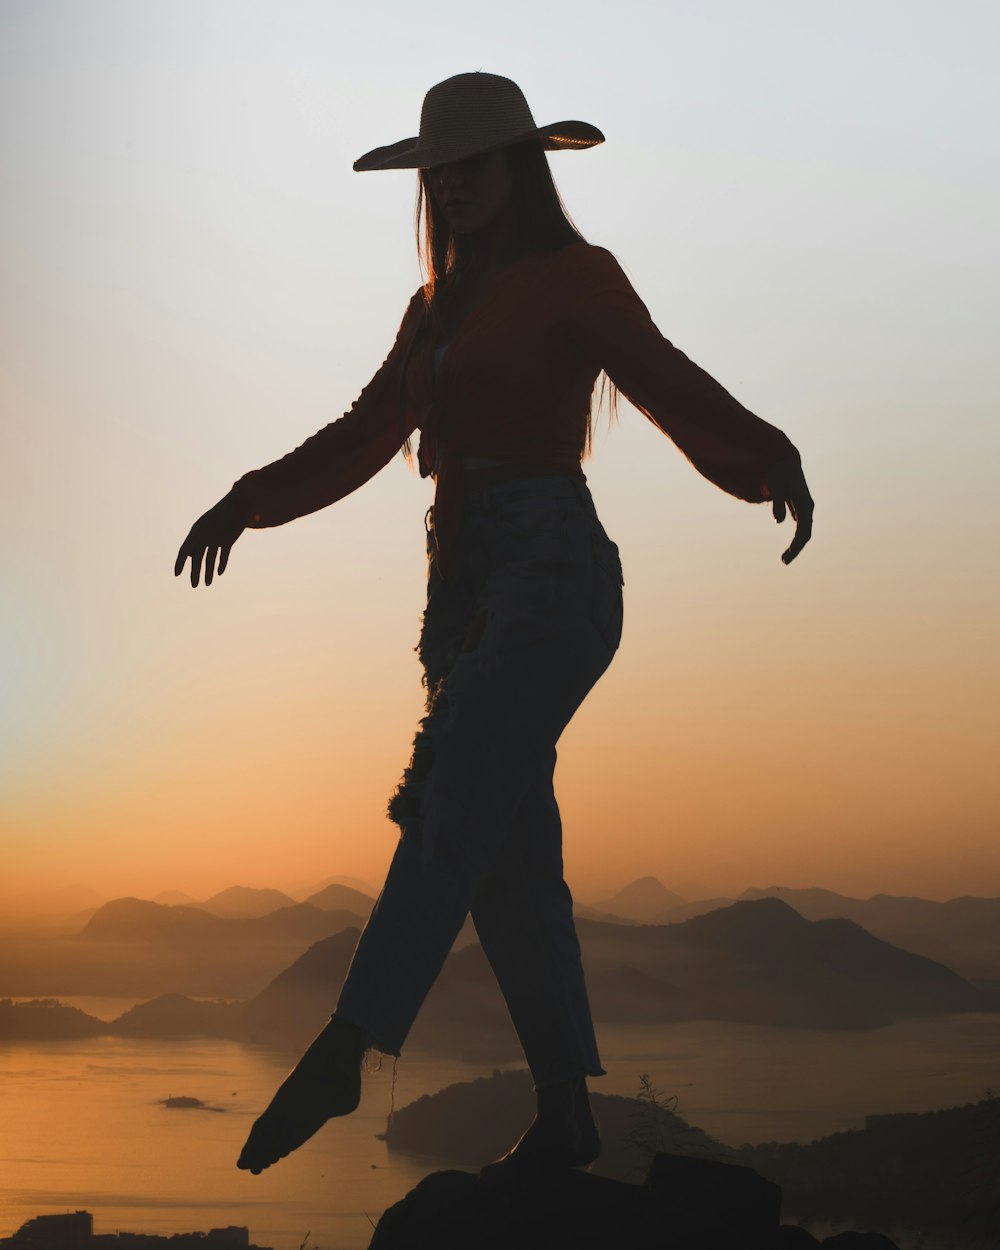 silhouette of a man wearing hat and shorts